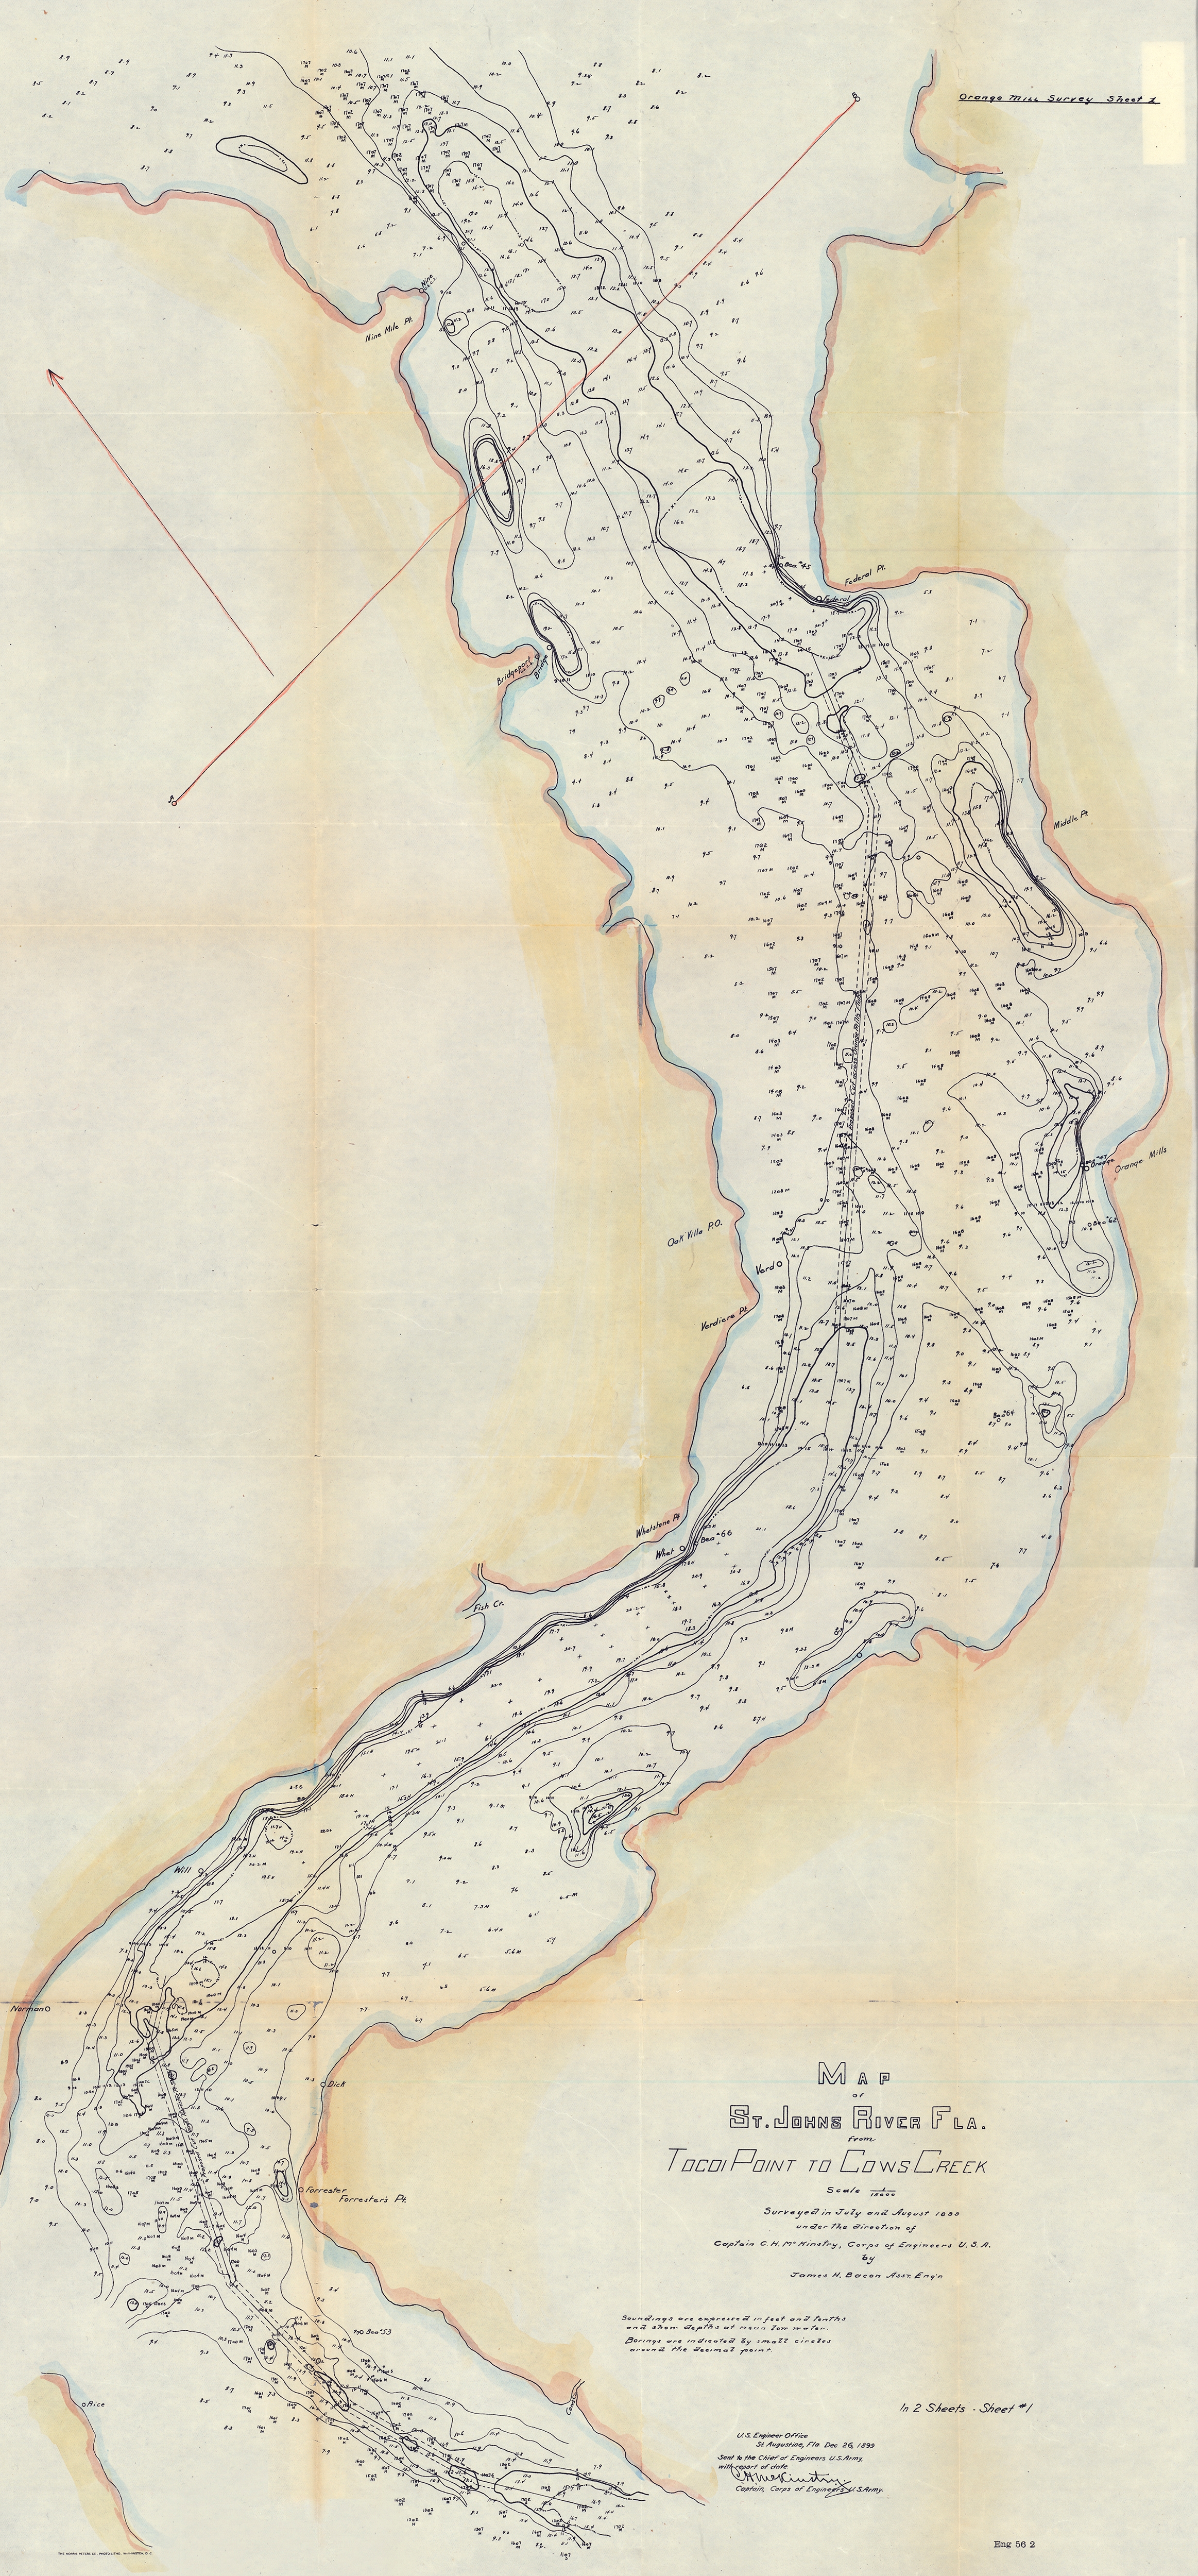 St. Johns River Nautical Chart, Tocoi Point to Cows Creek, 1899